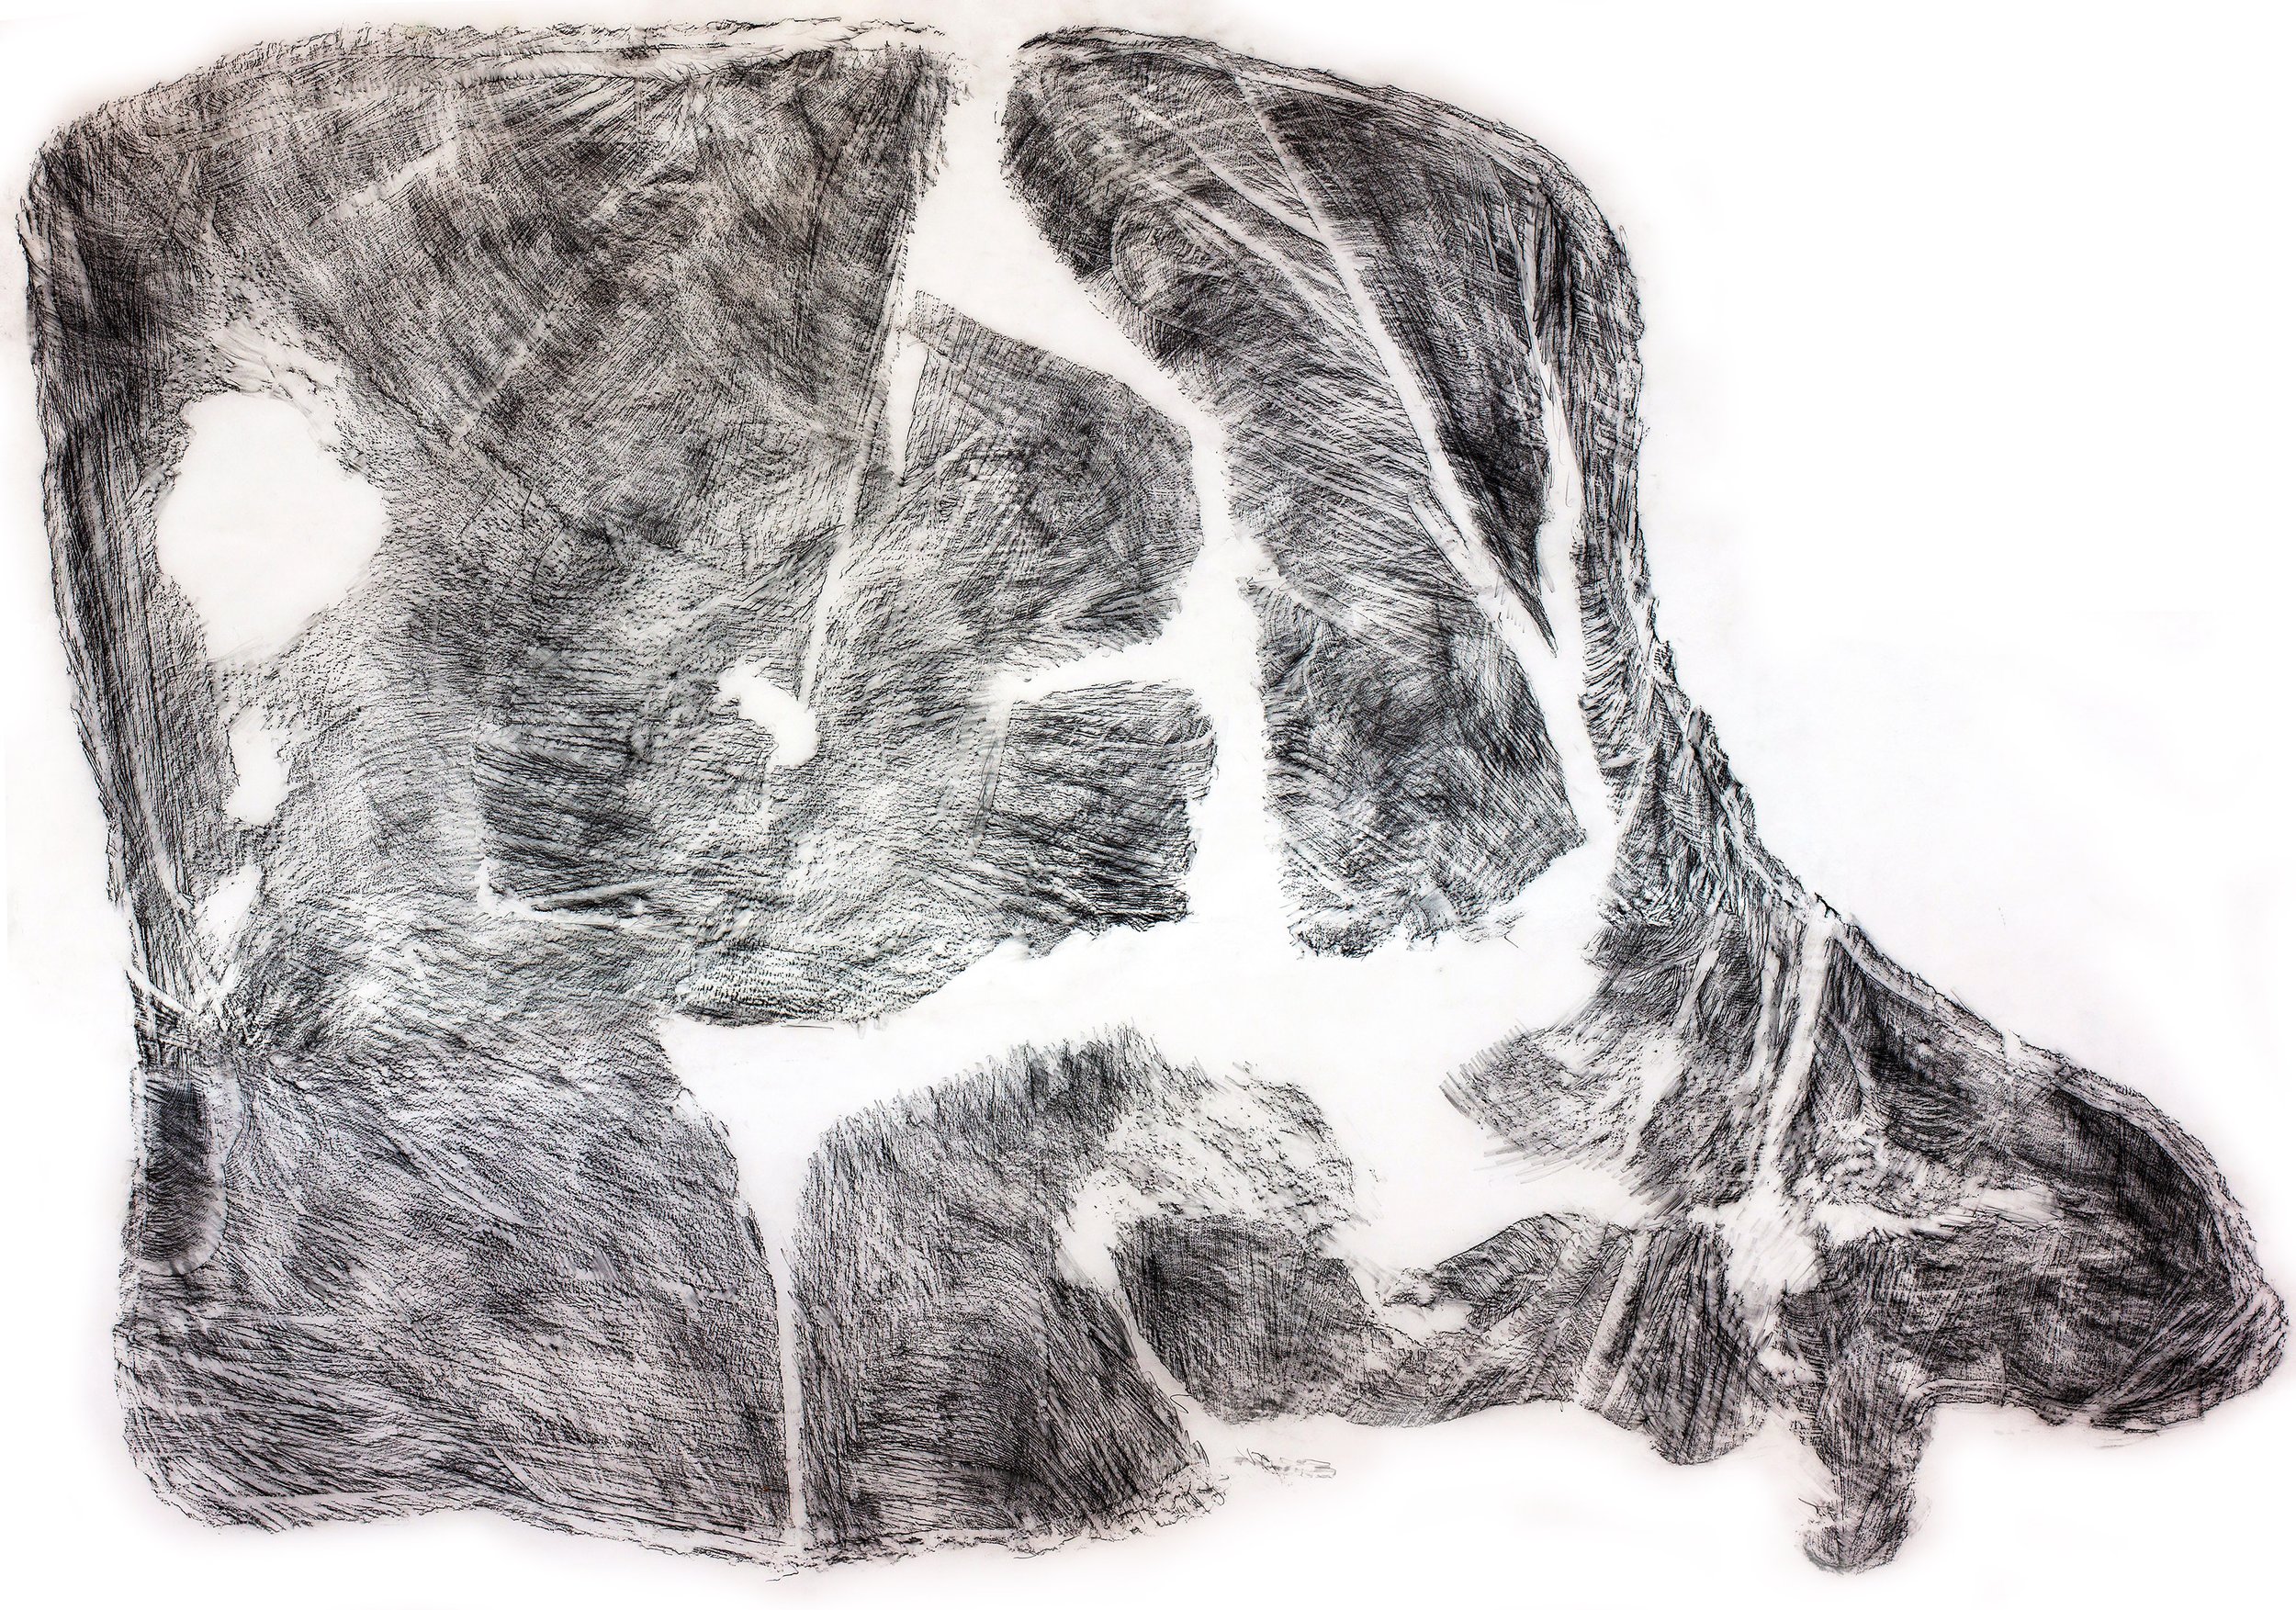    chainsaw marks 3  . pencil rubbing on tracing paper, 2018. 187 x 131 cm 